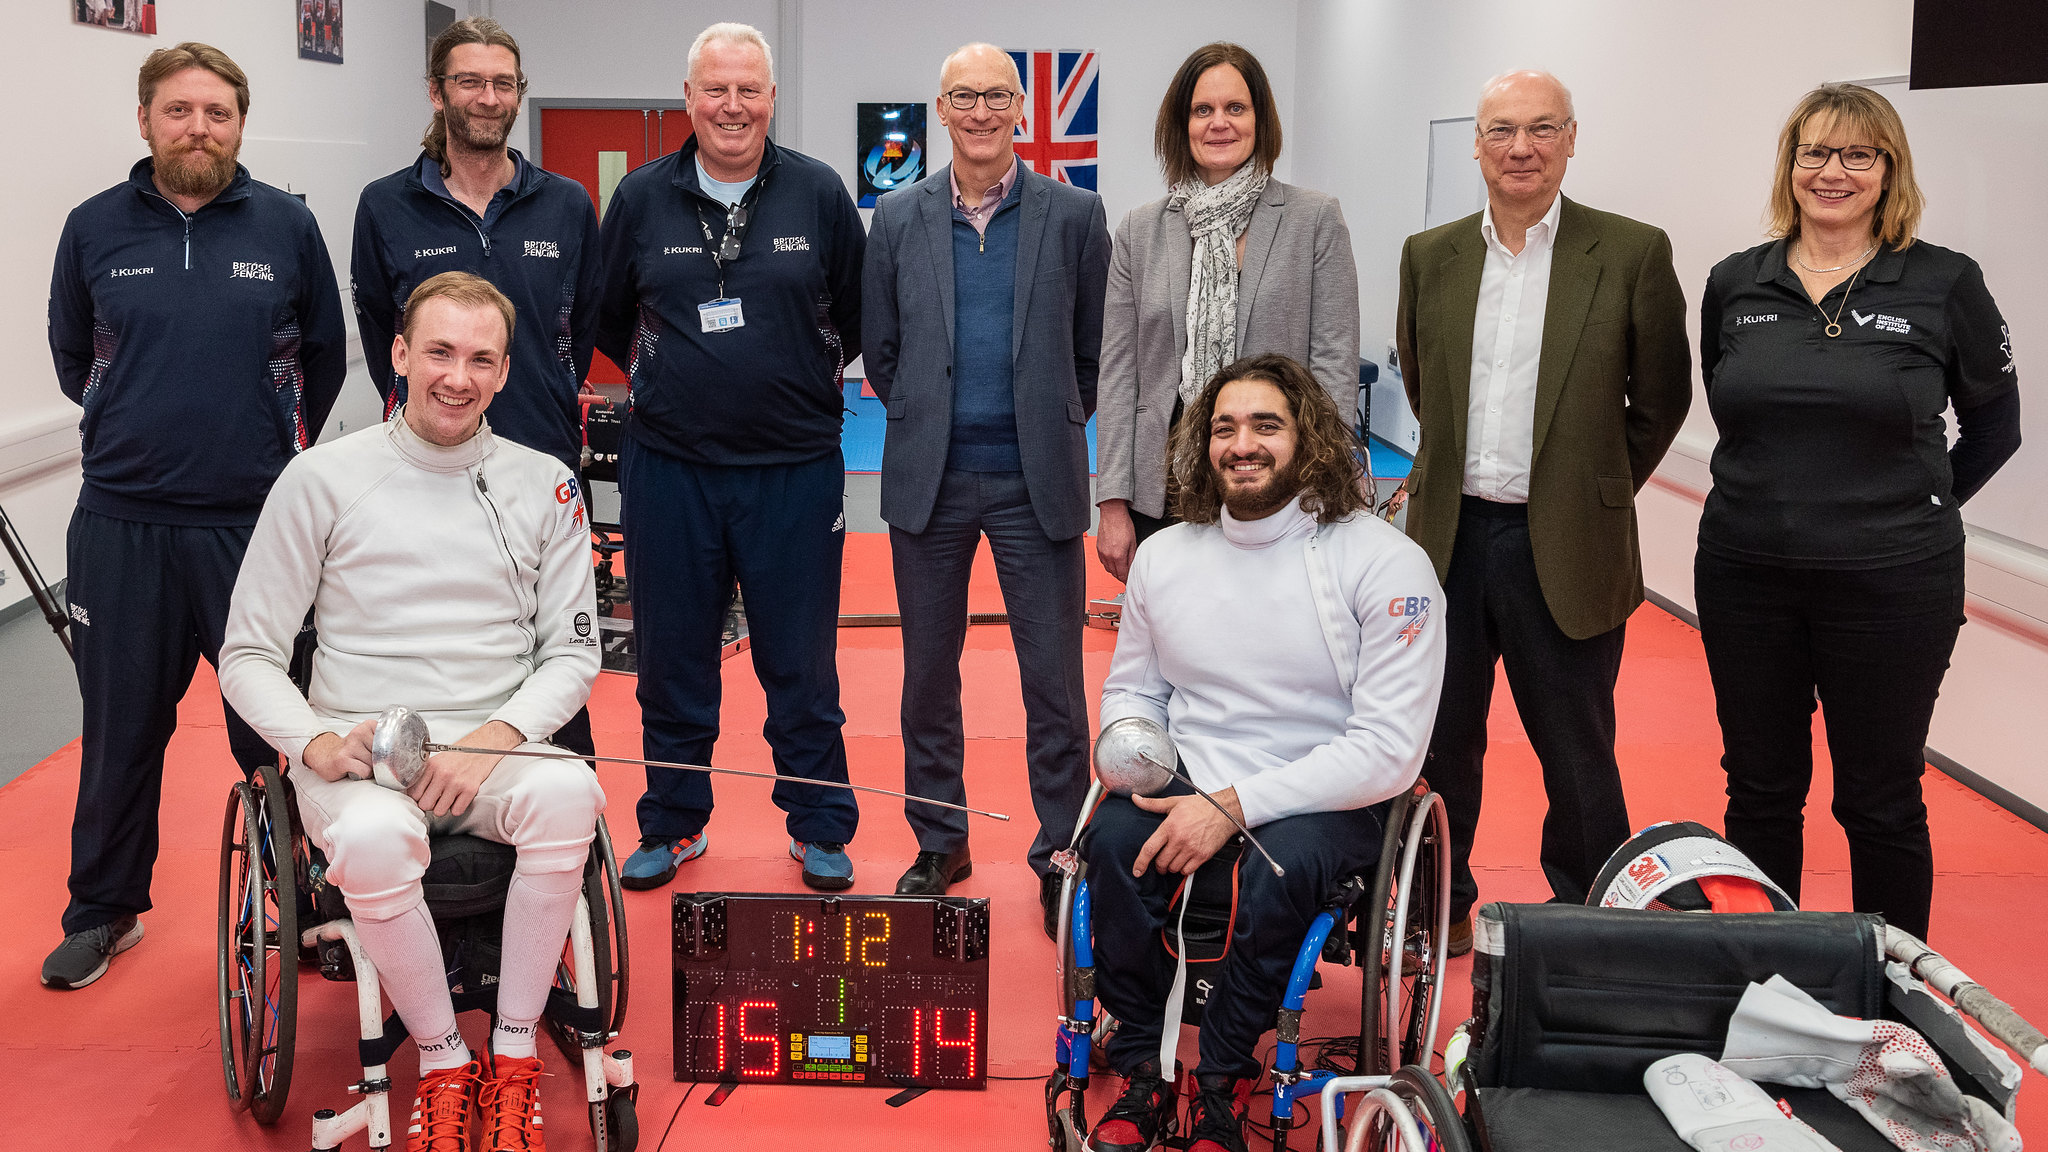 (Front) Piers Gilliver and Dimitri Coutya are joined by their coaches plus representatives from the University of Bath and the EIS at the opening of the new Wheelchair Fencing National Training Centre